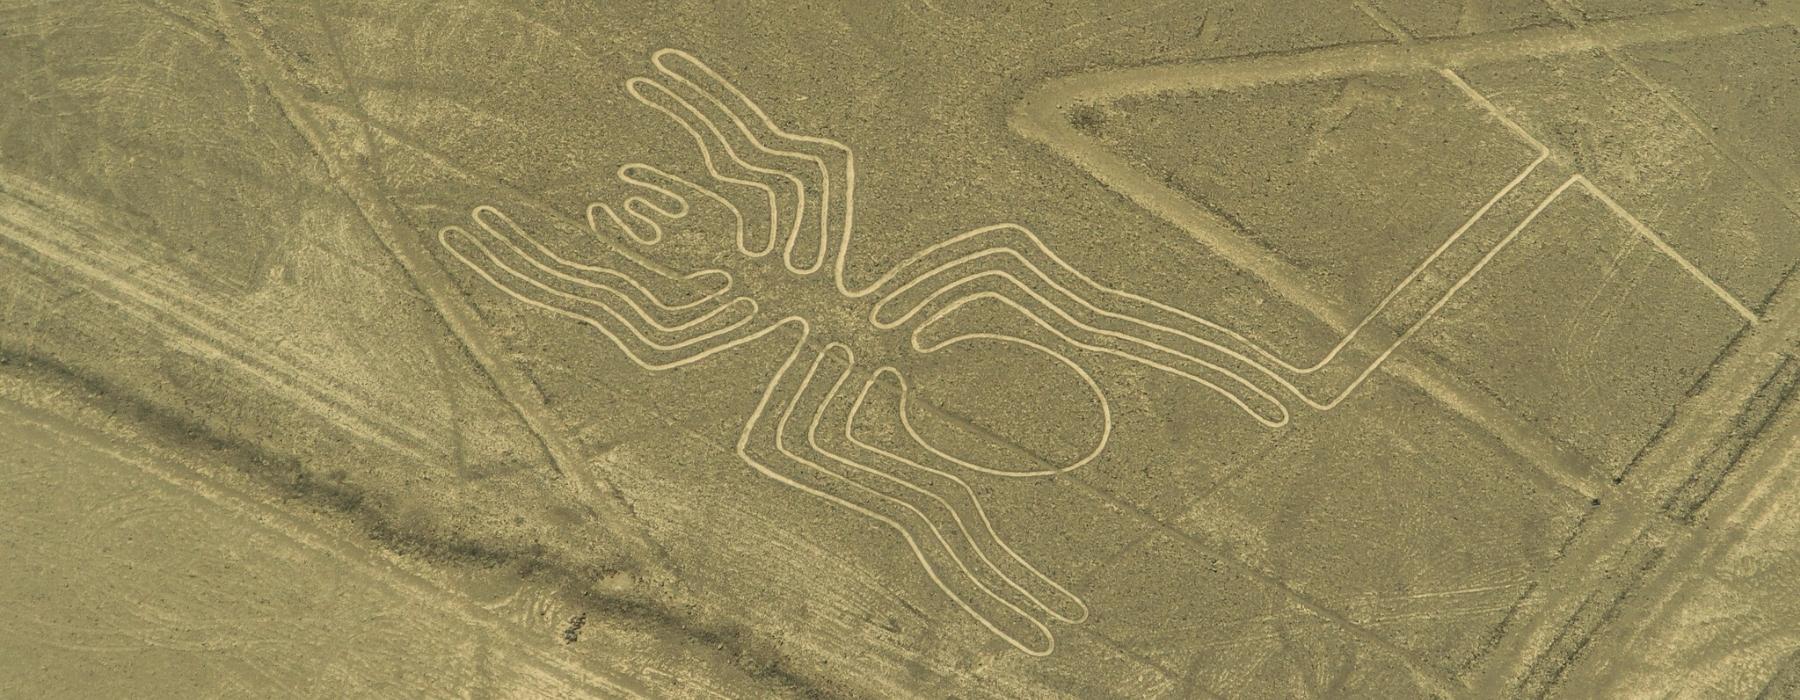 MYSTERIOUS NAZCA LINES